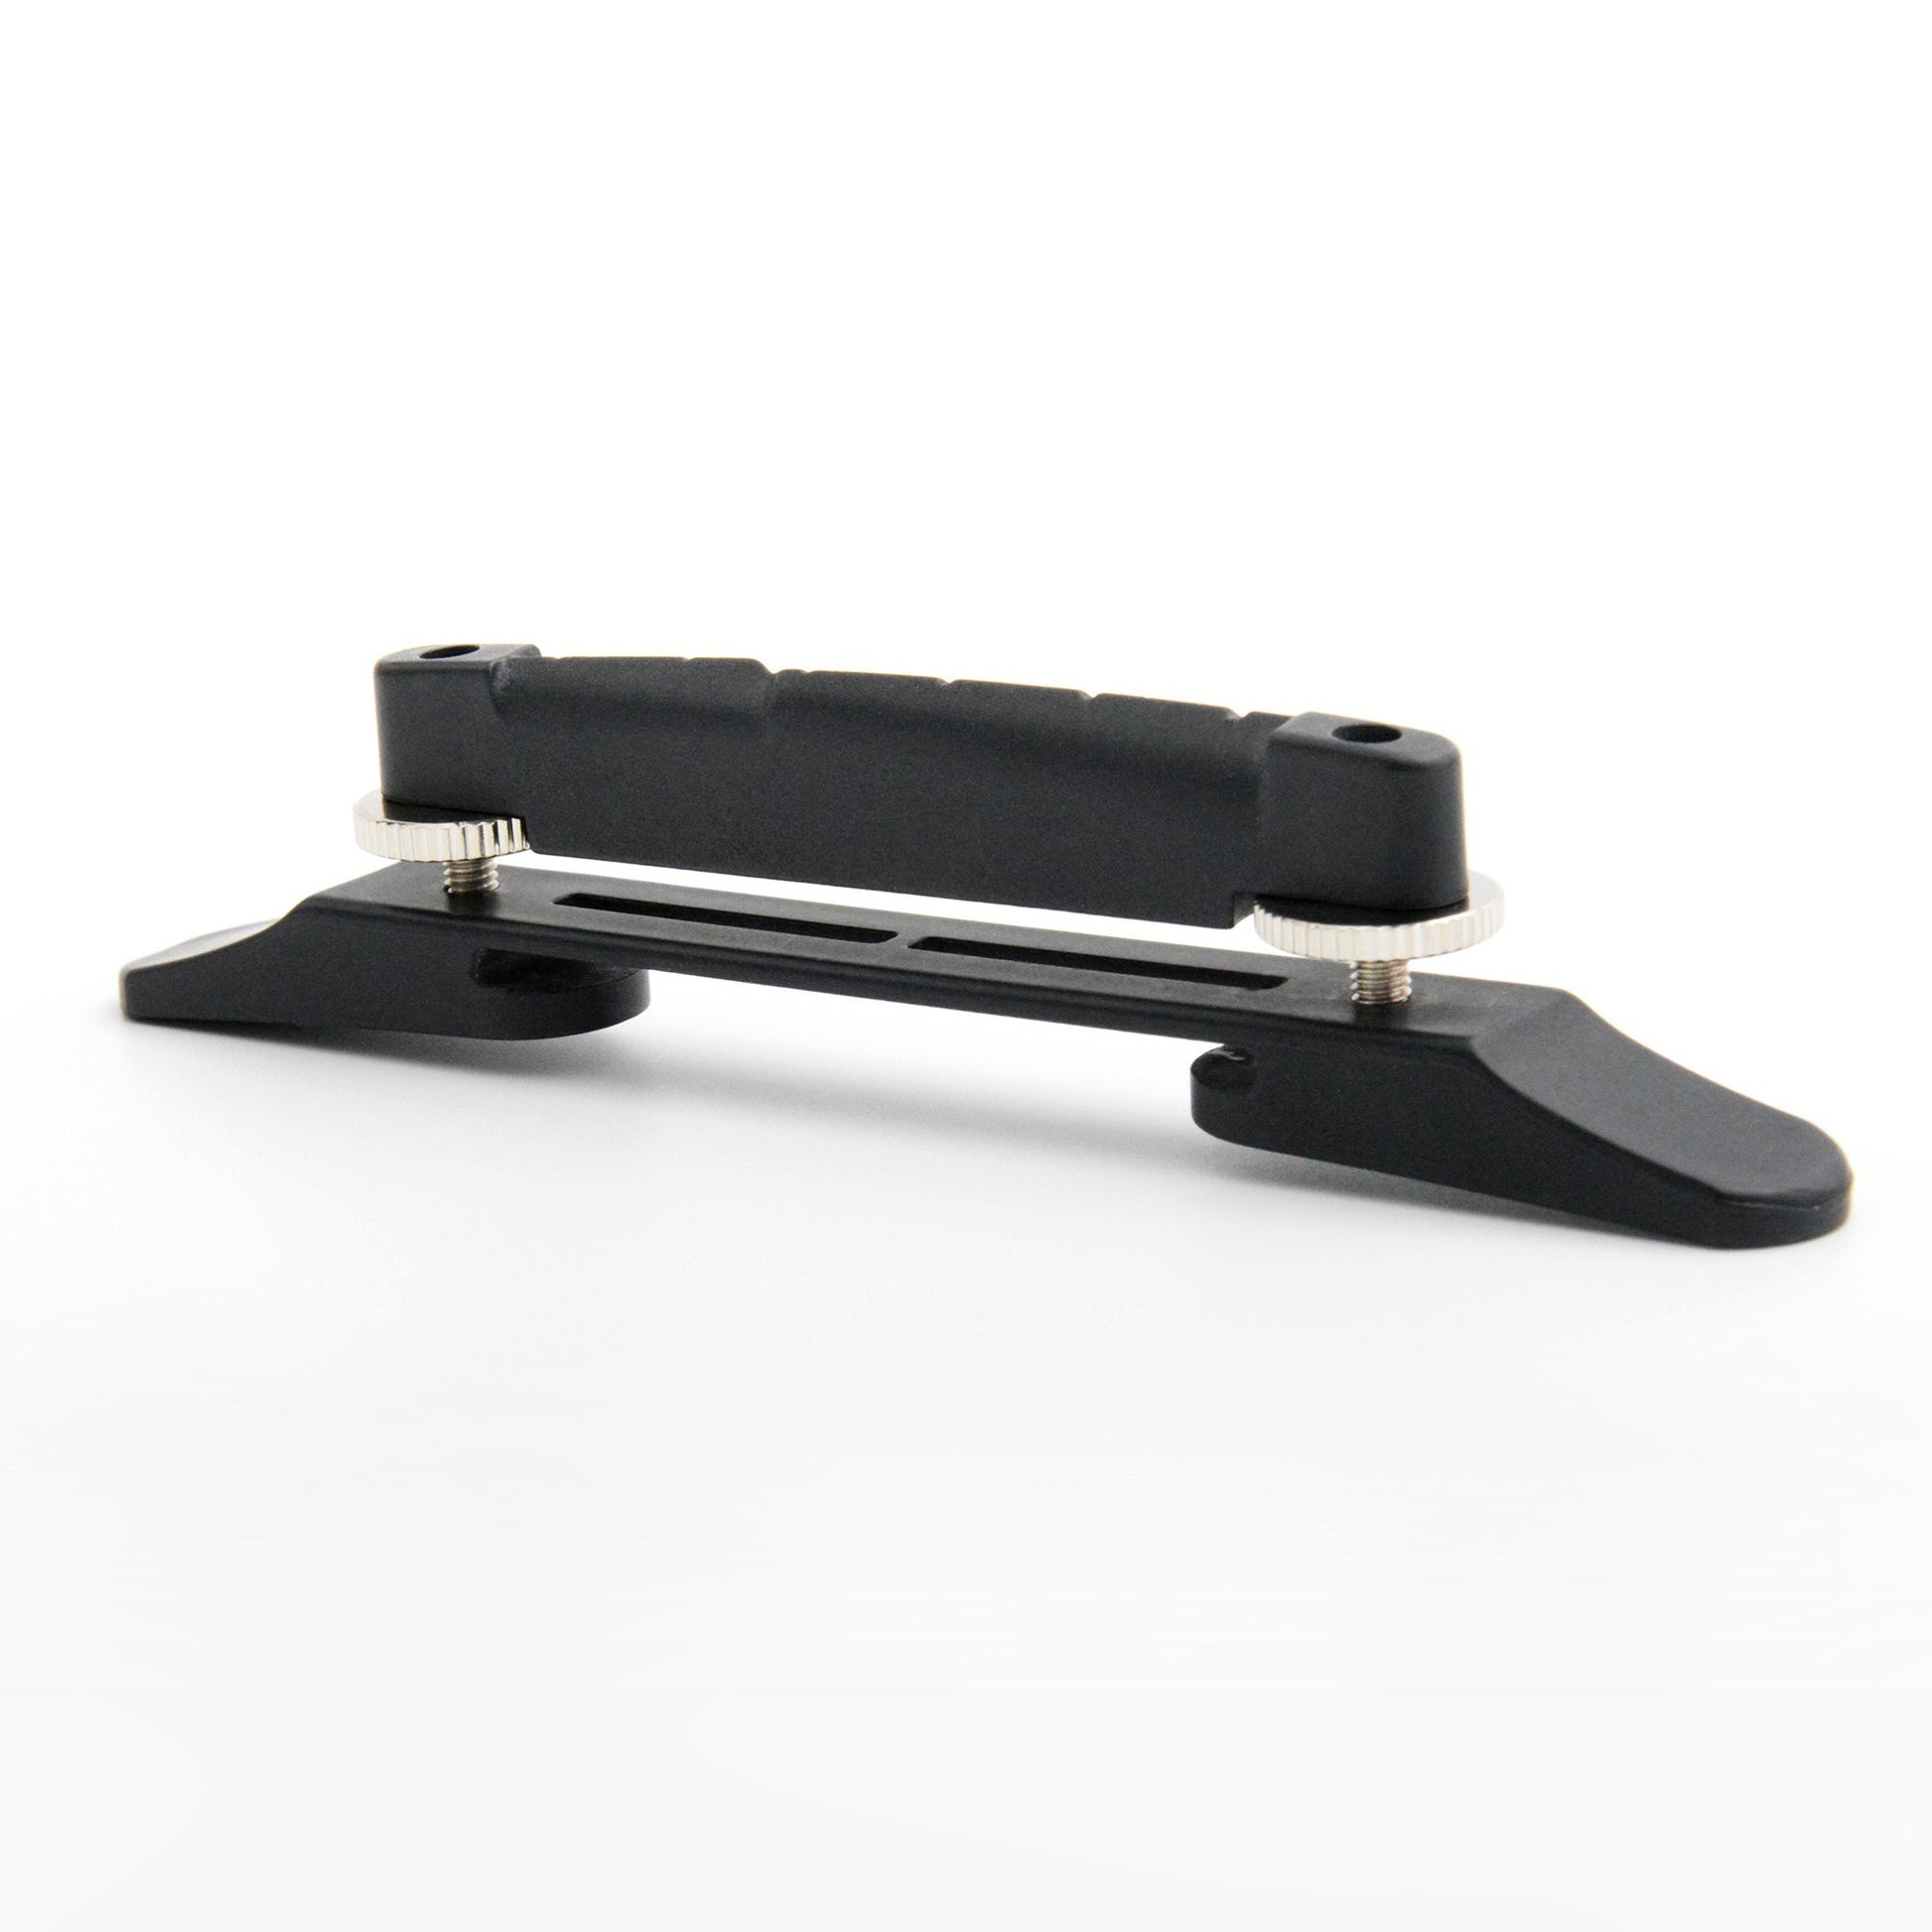 ResoMax Archtop Bridge Standard and Low Profile (select height and screw finish) - Graph Tech Guitar Labs Ltd.